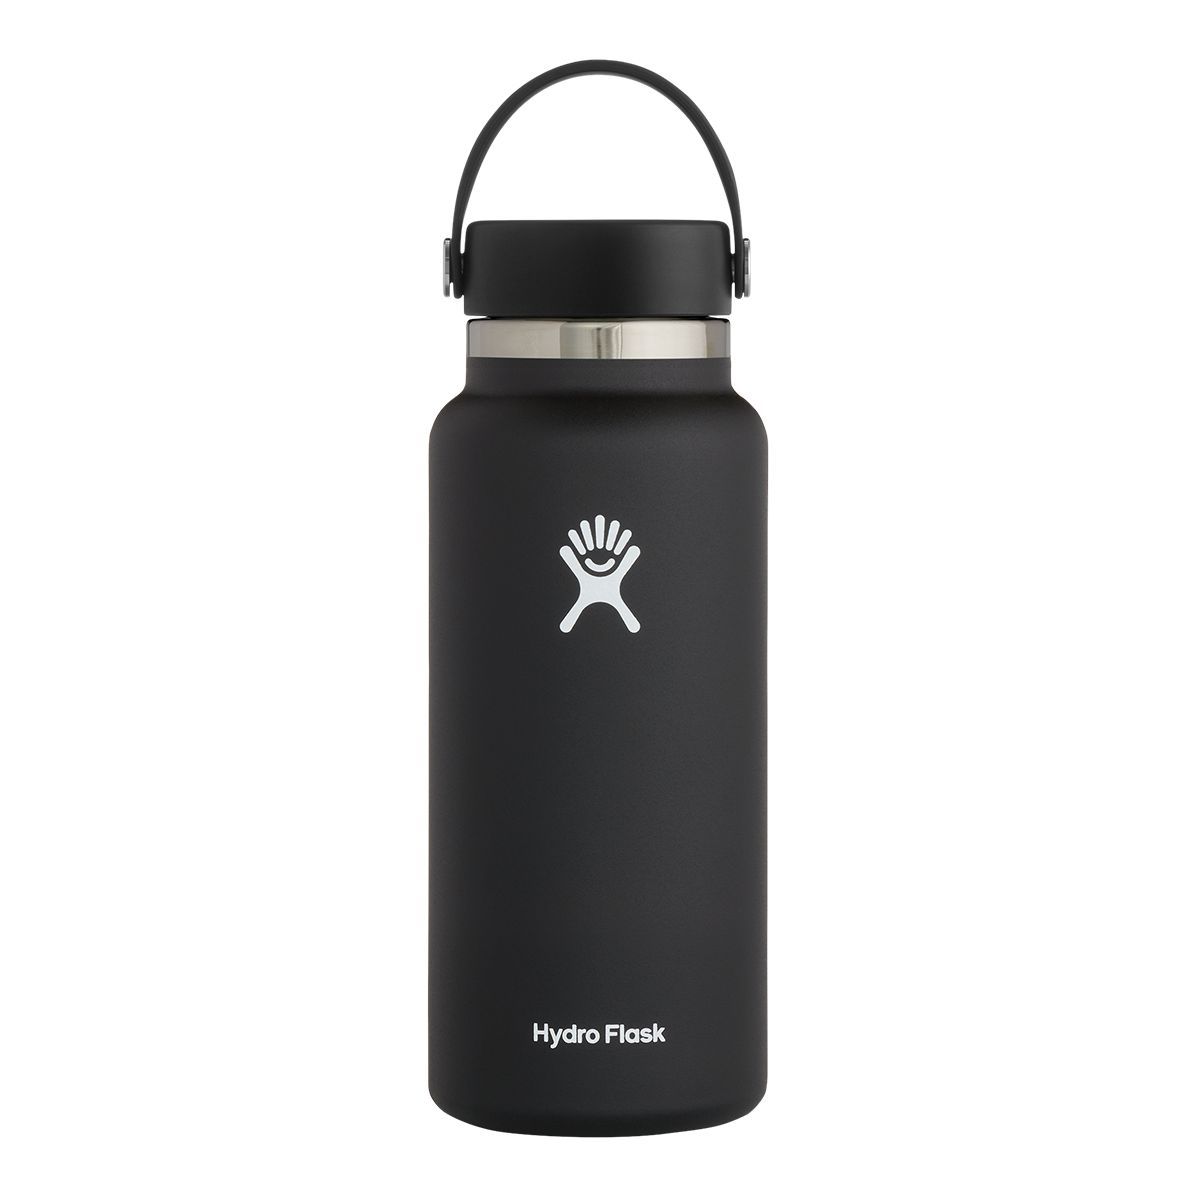 Hydroflask Wide Mouth 32 oz Water Bottle Screw Cap Insulated Stainless Steel